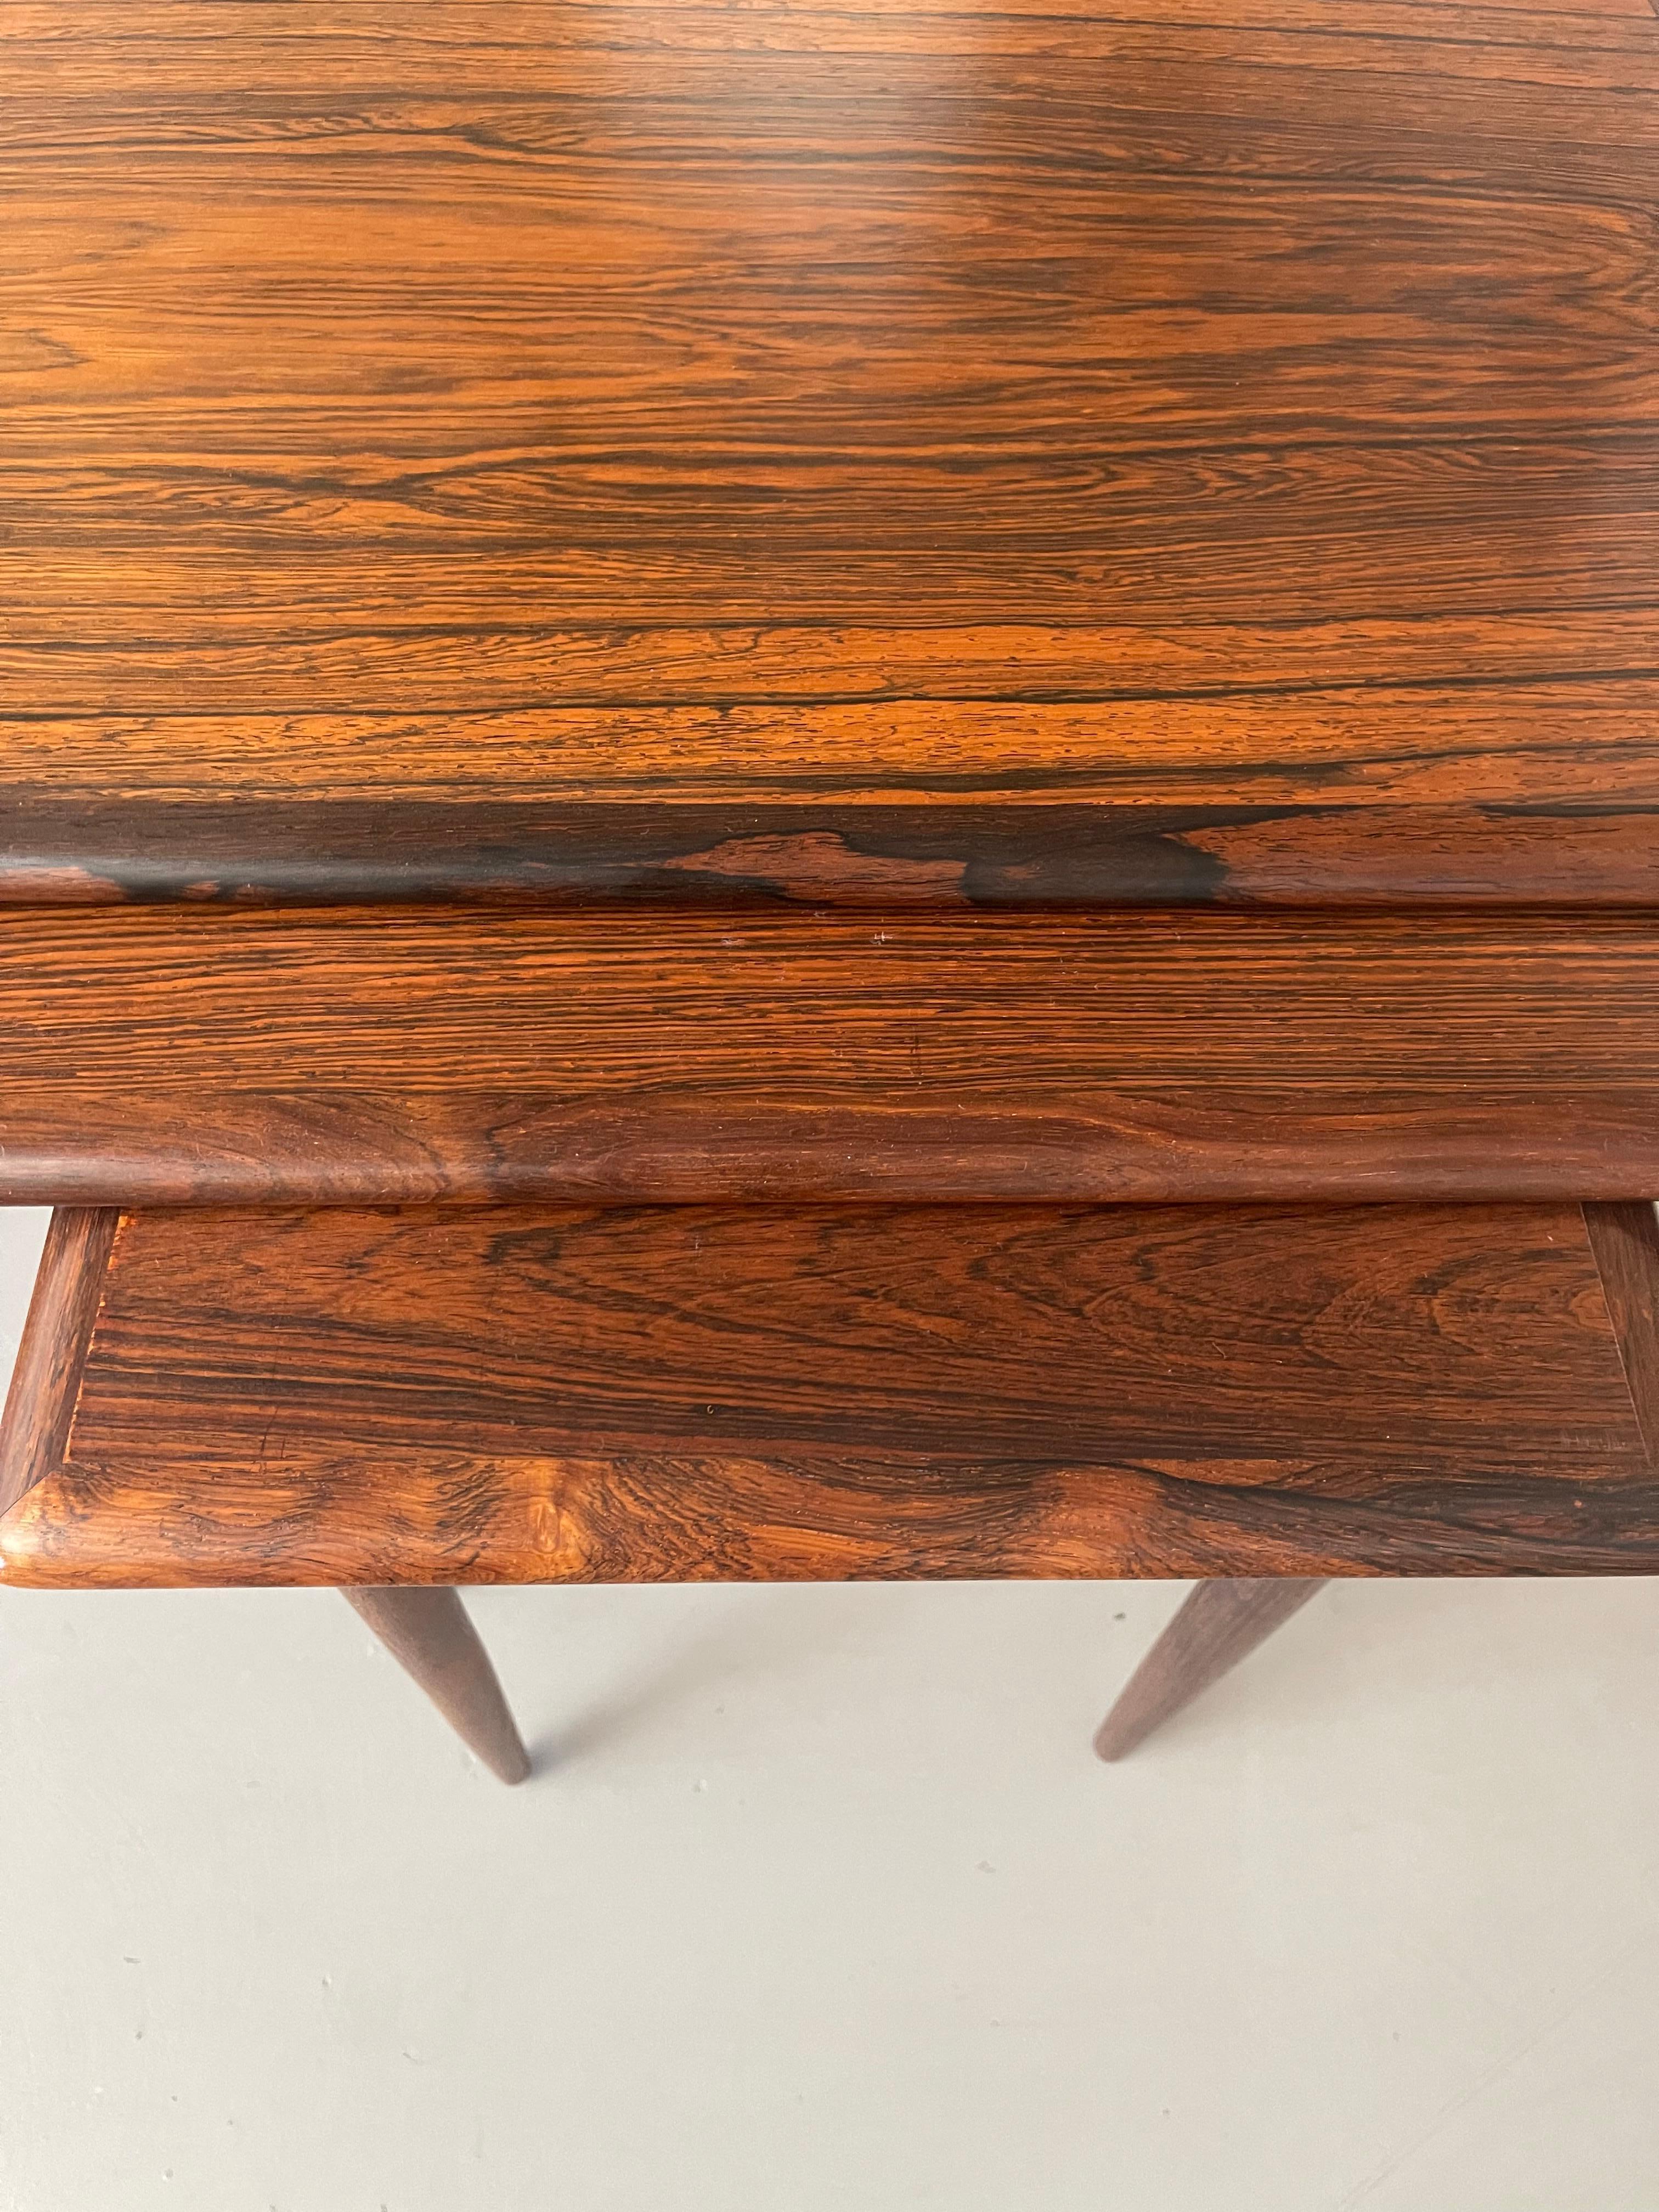 A stunning set of three nesting tables in beautifully grained rosewood. The two smaller tables slide into grooves into the larger piece. Designed by Poul Hundevad in the 1960's. They are in good age appropriate condition with some light surface